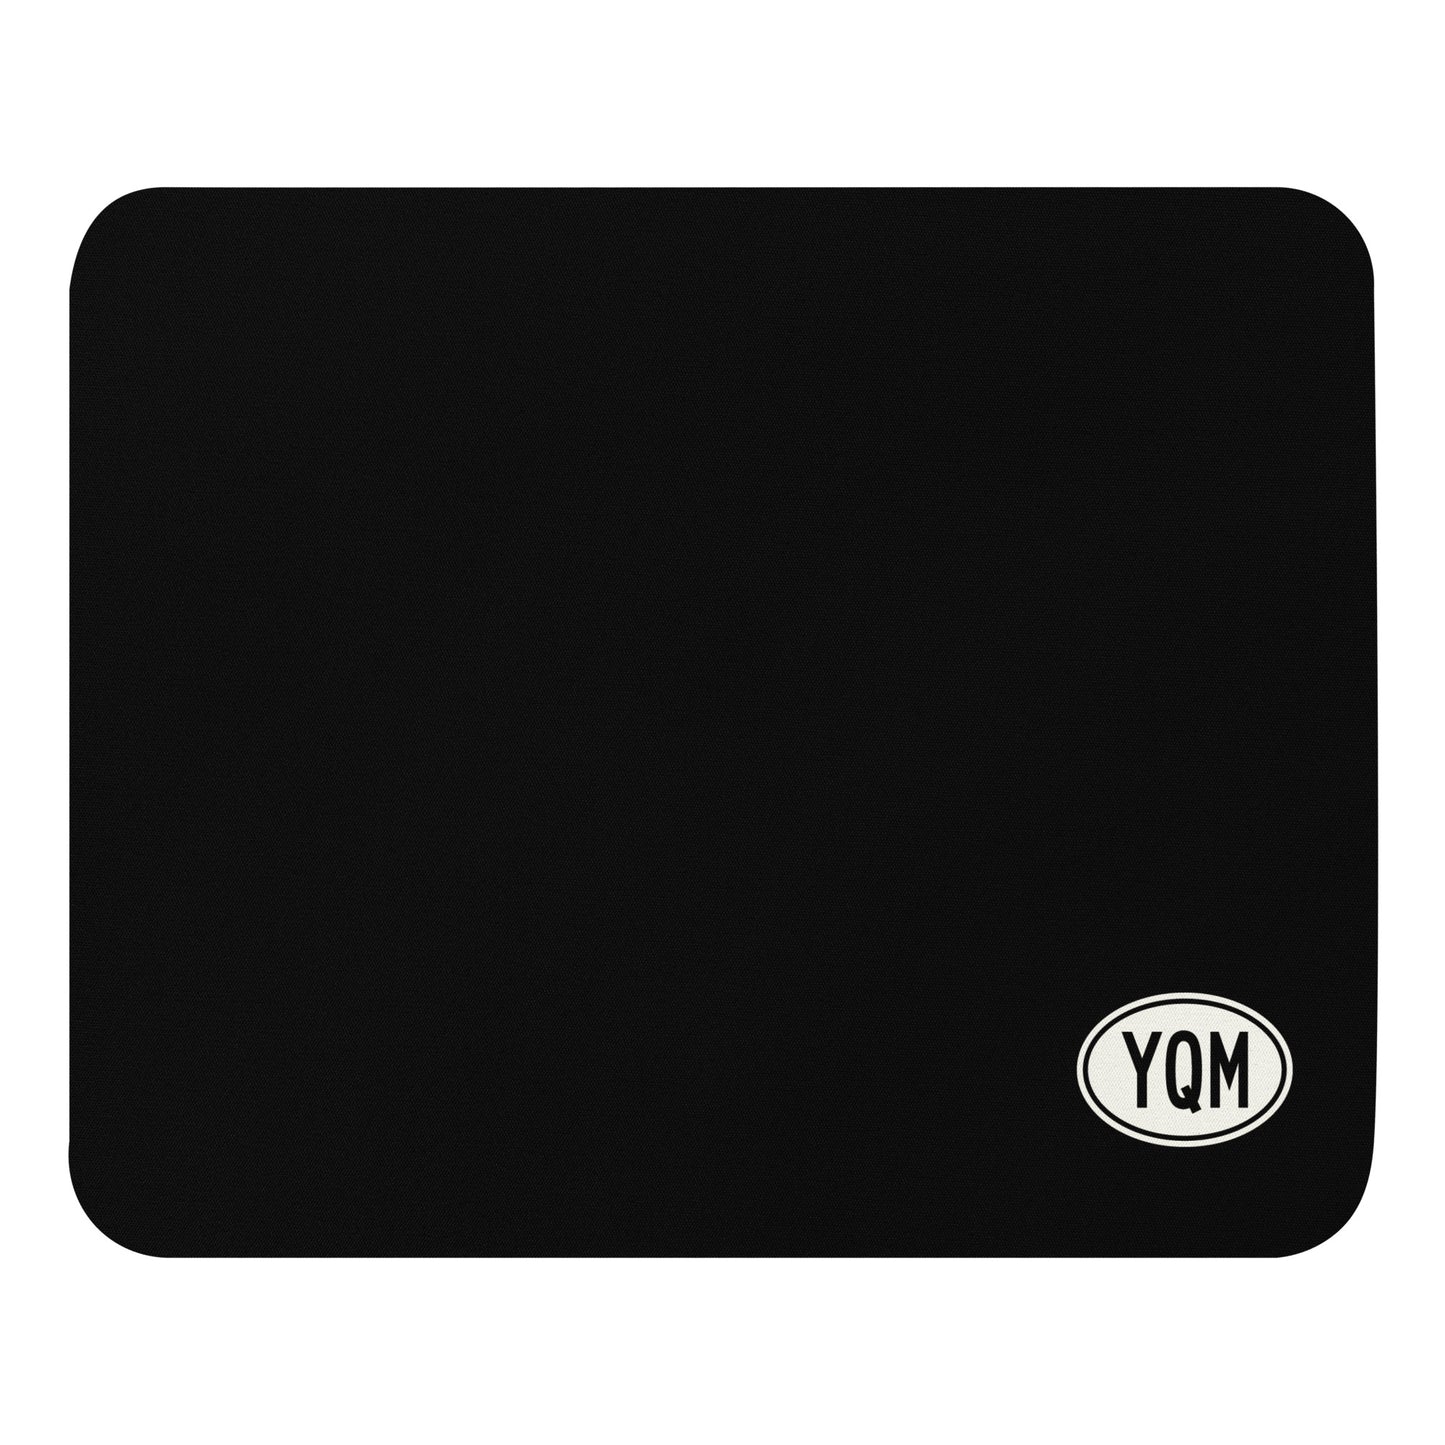 Unique Travel Gift Mouse Pad - White Oval • YQM Moncton • YHM Designs - Image 01